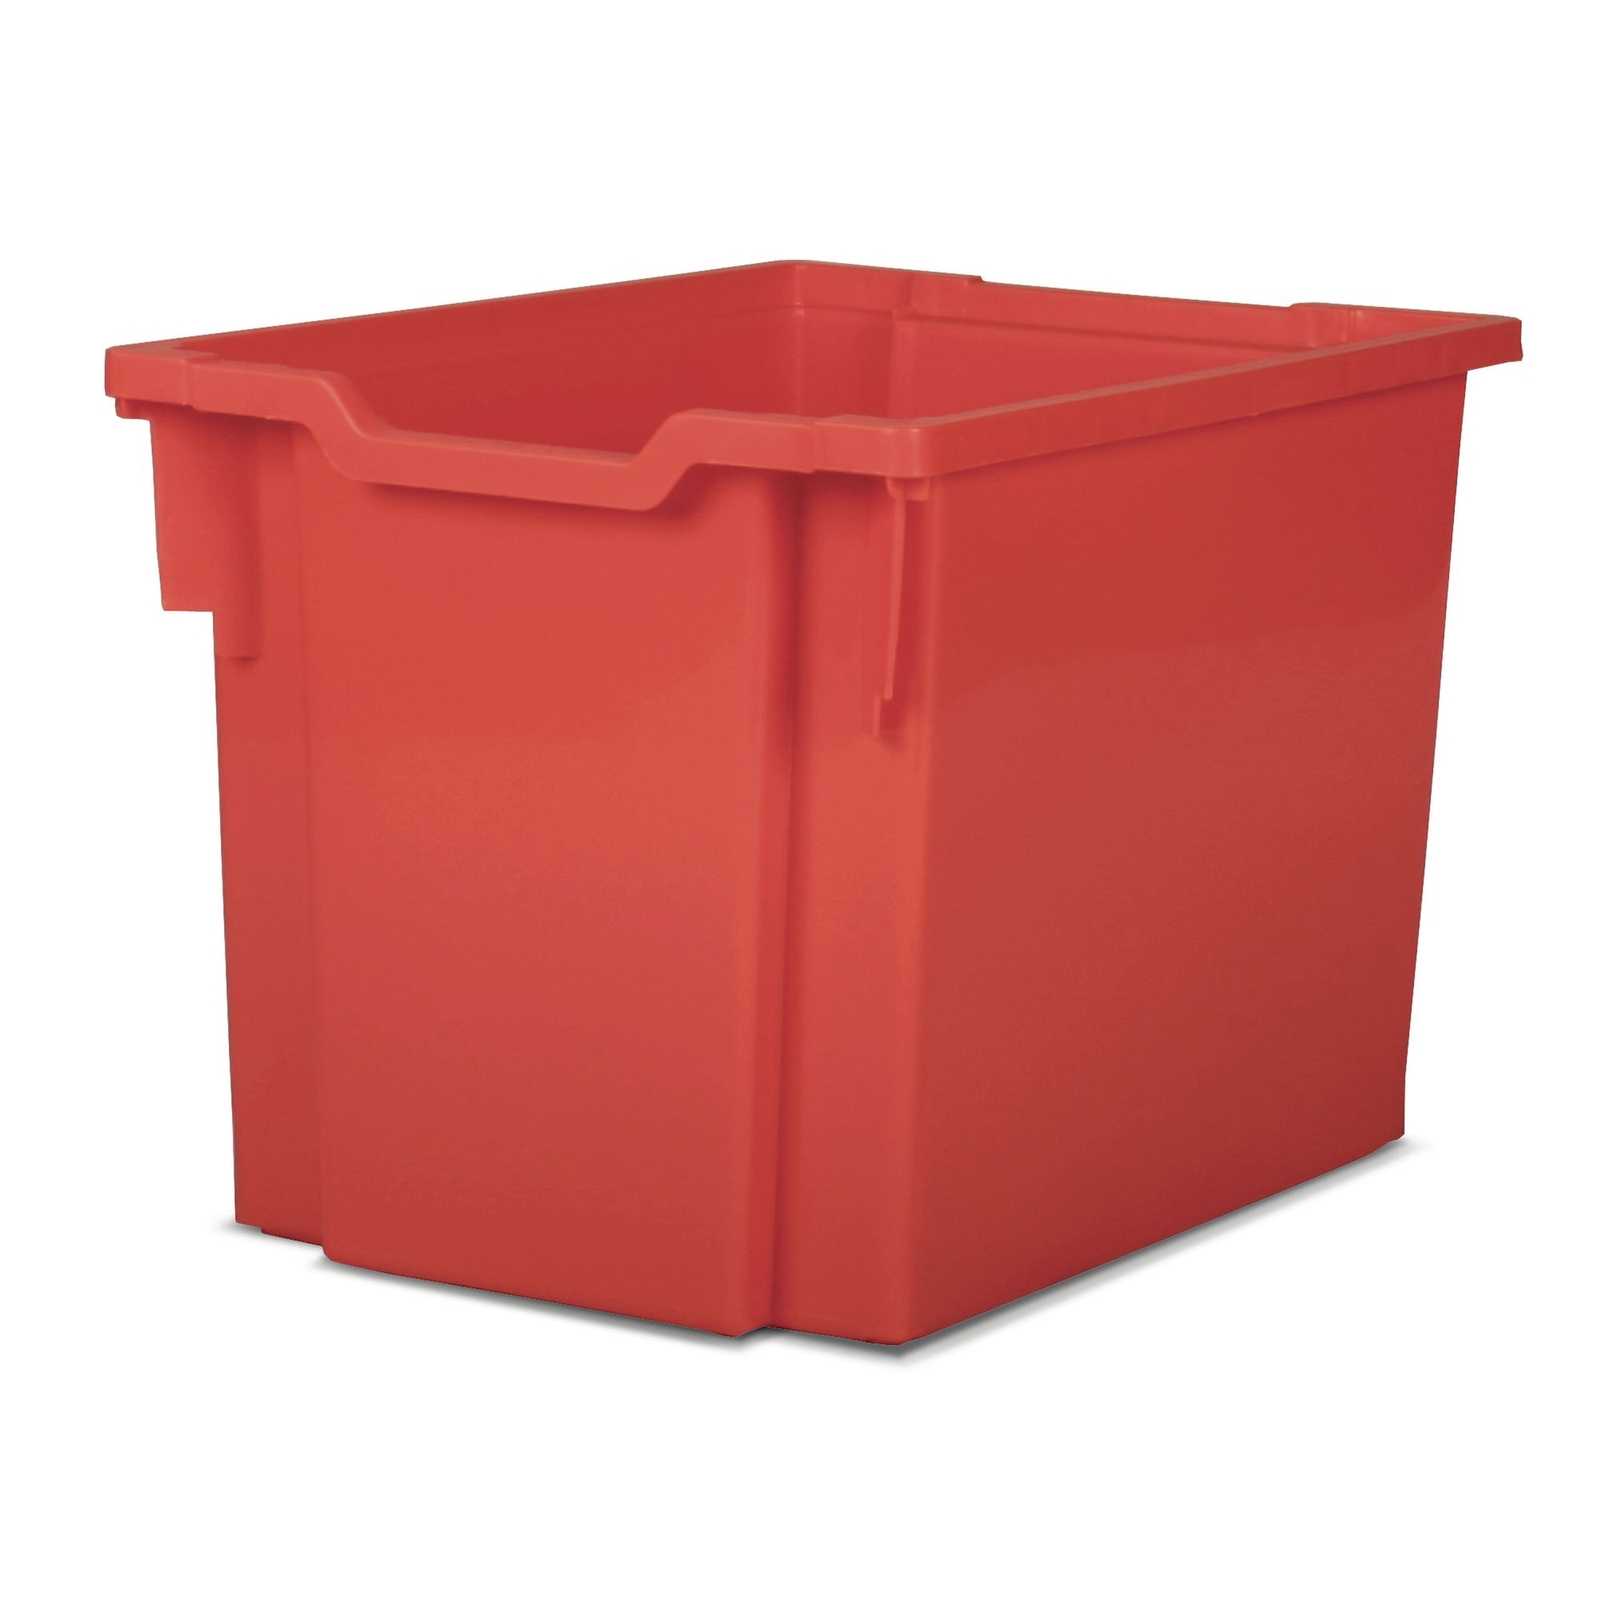 Gratnell Red Jumbo Storage Tray - W312 x H300 x D430mm - Each